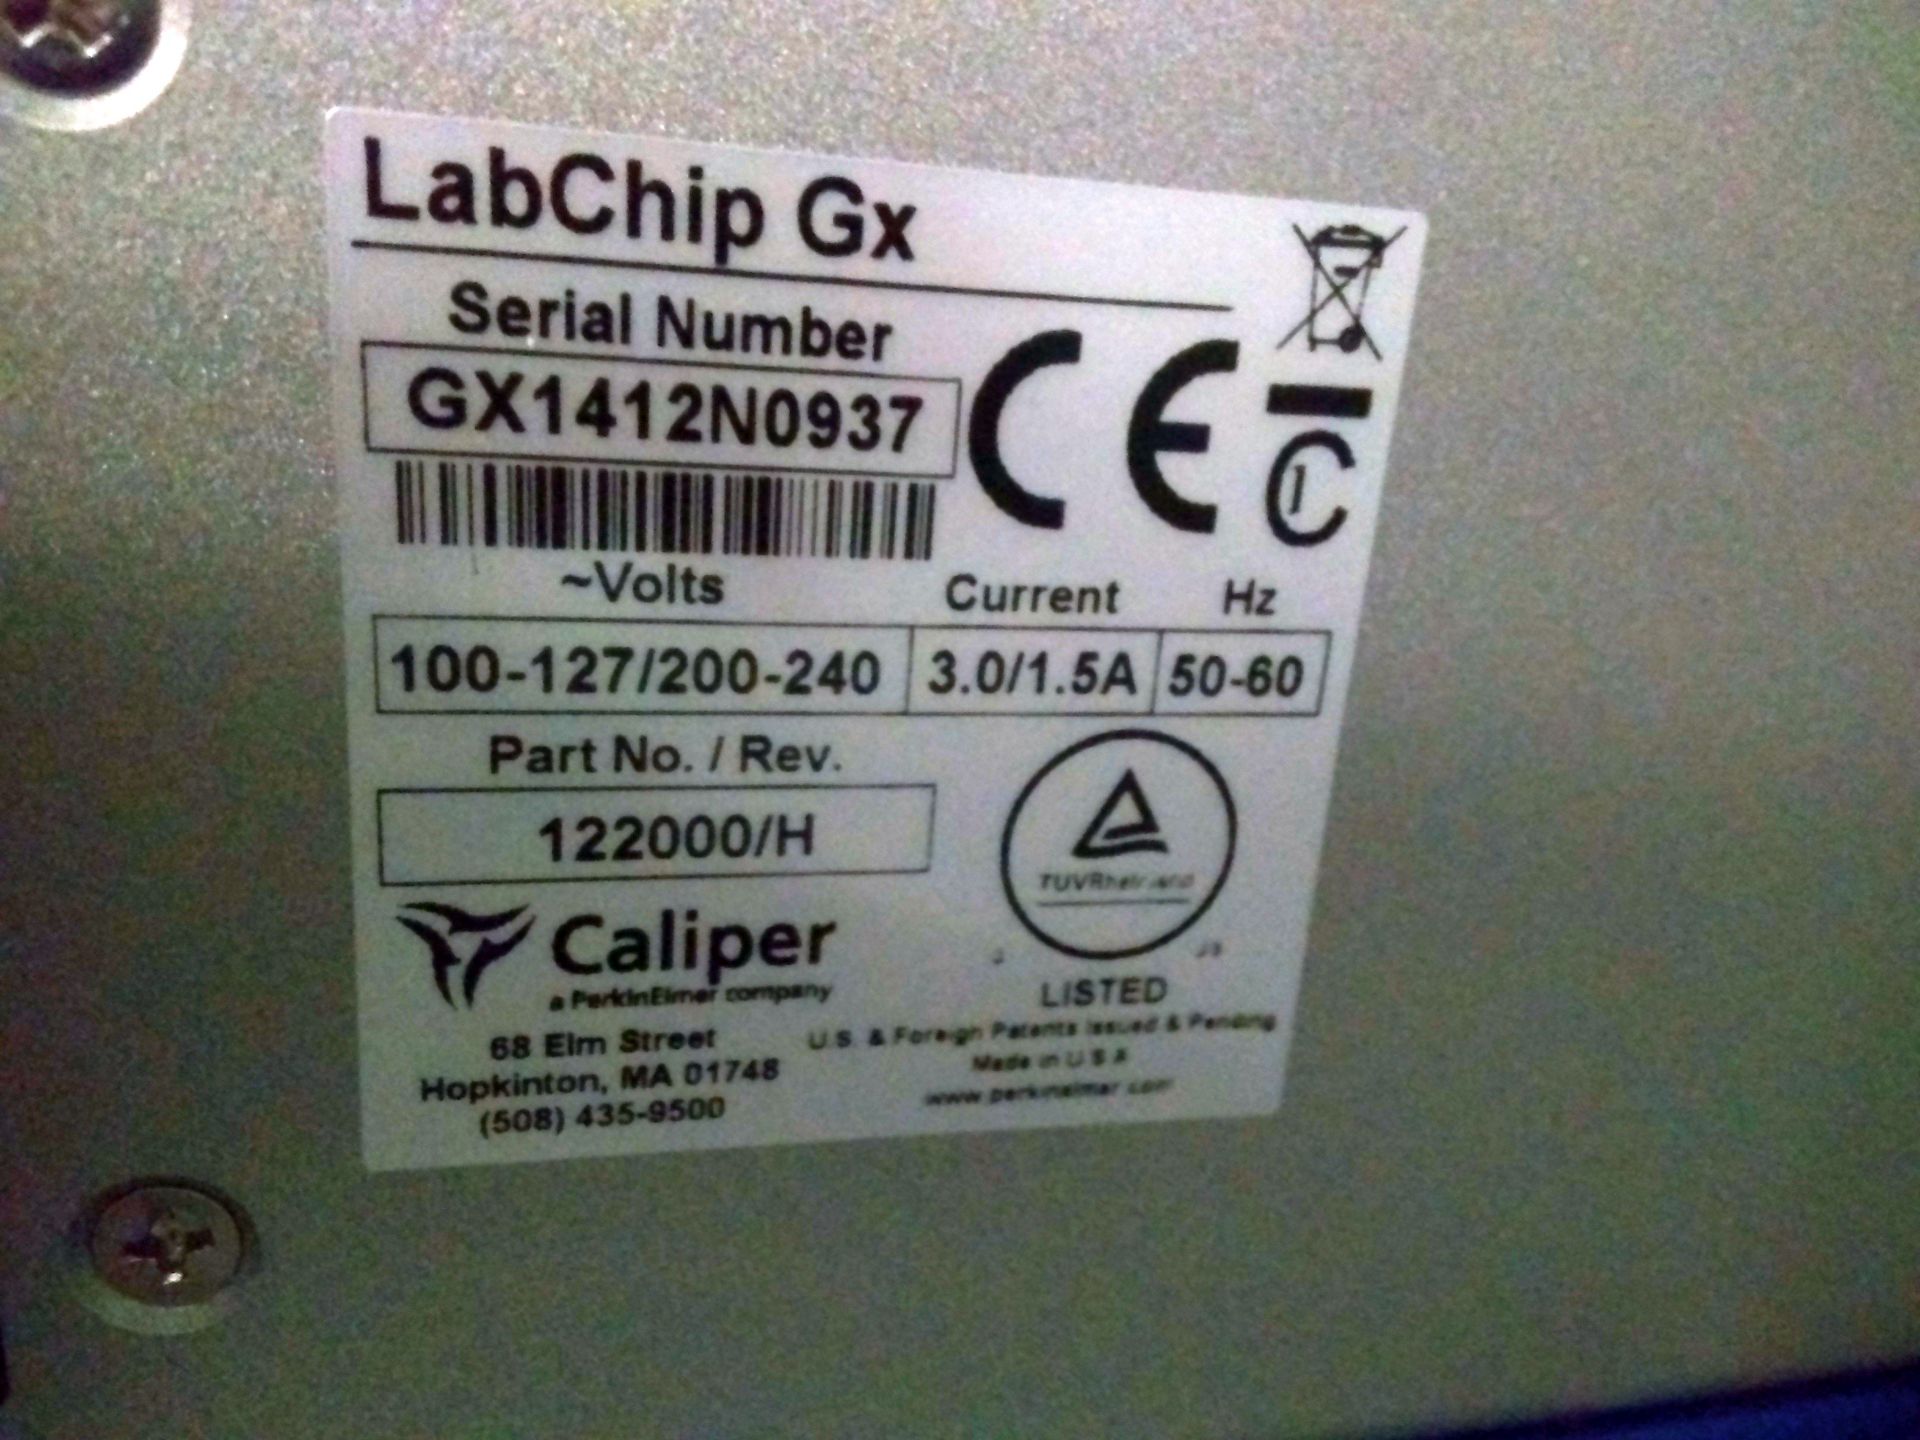 Caliper Life Sciences LabChip Gx Protein Characterization Tool - Image 8 of 8